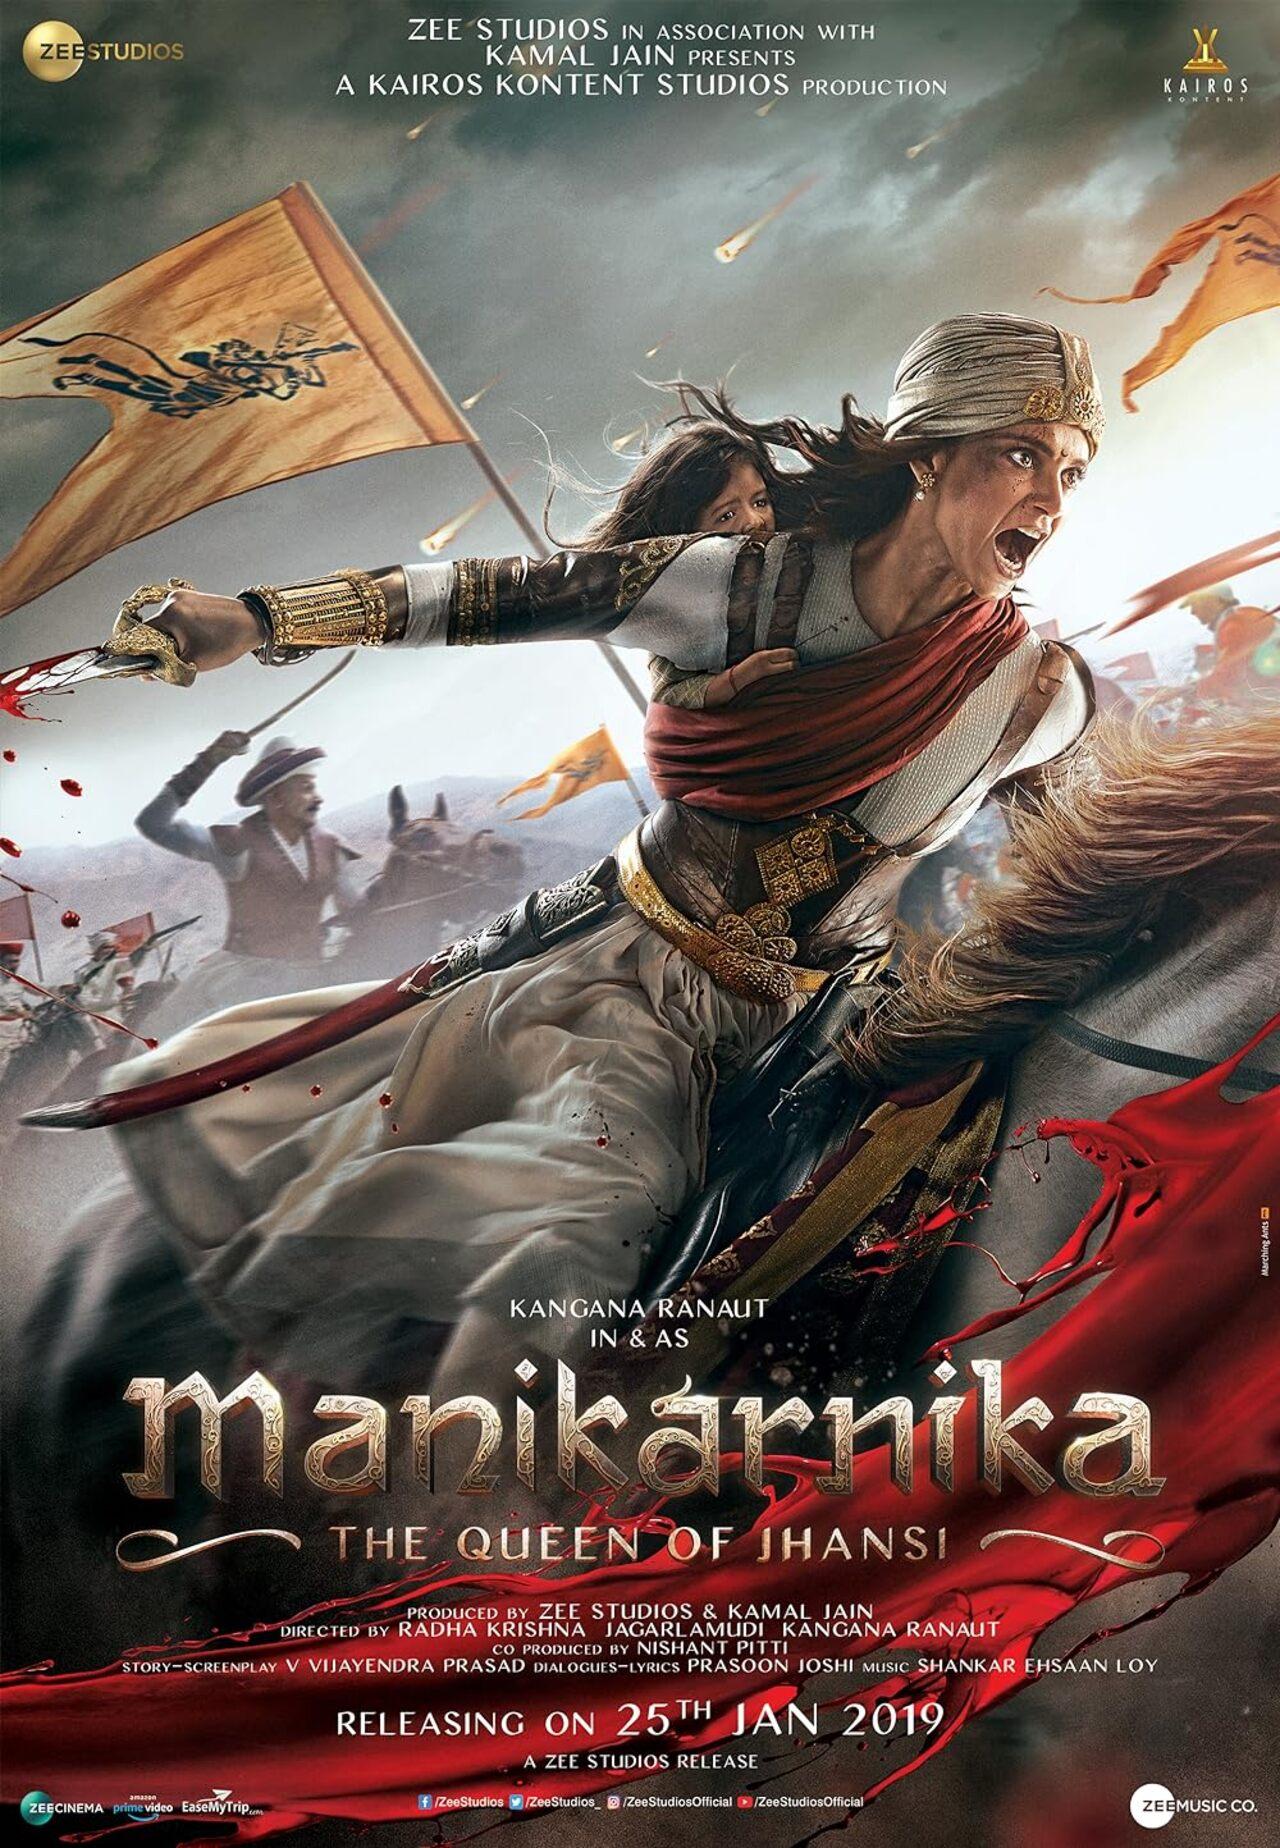 'Manikarnika-The Queen of Jhansi' starring Kangana Ranaut in the historical drama earned a lifetime collection of Rs 92.19 cr